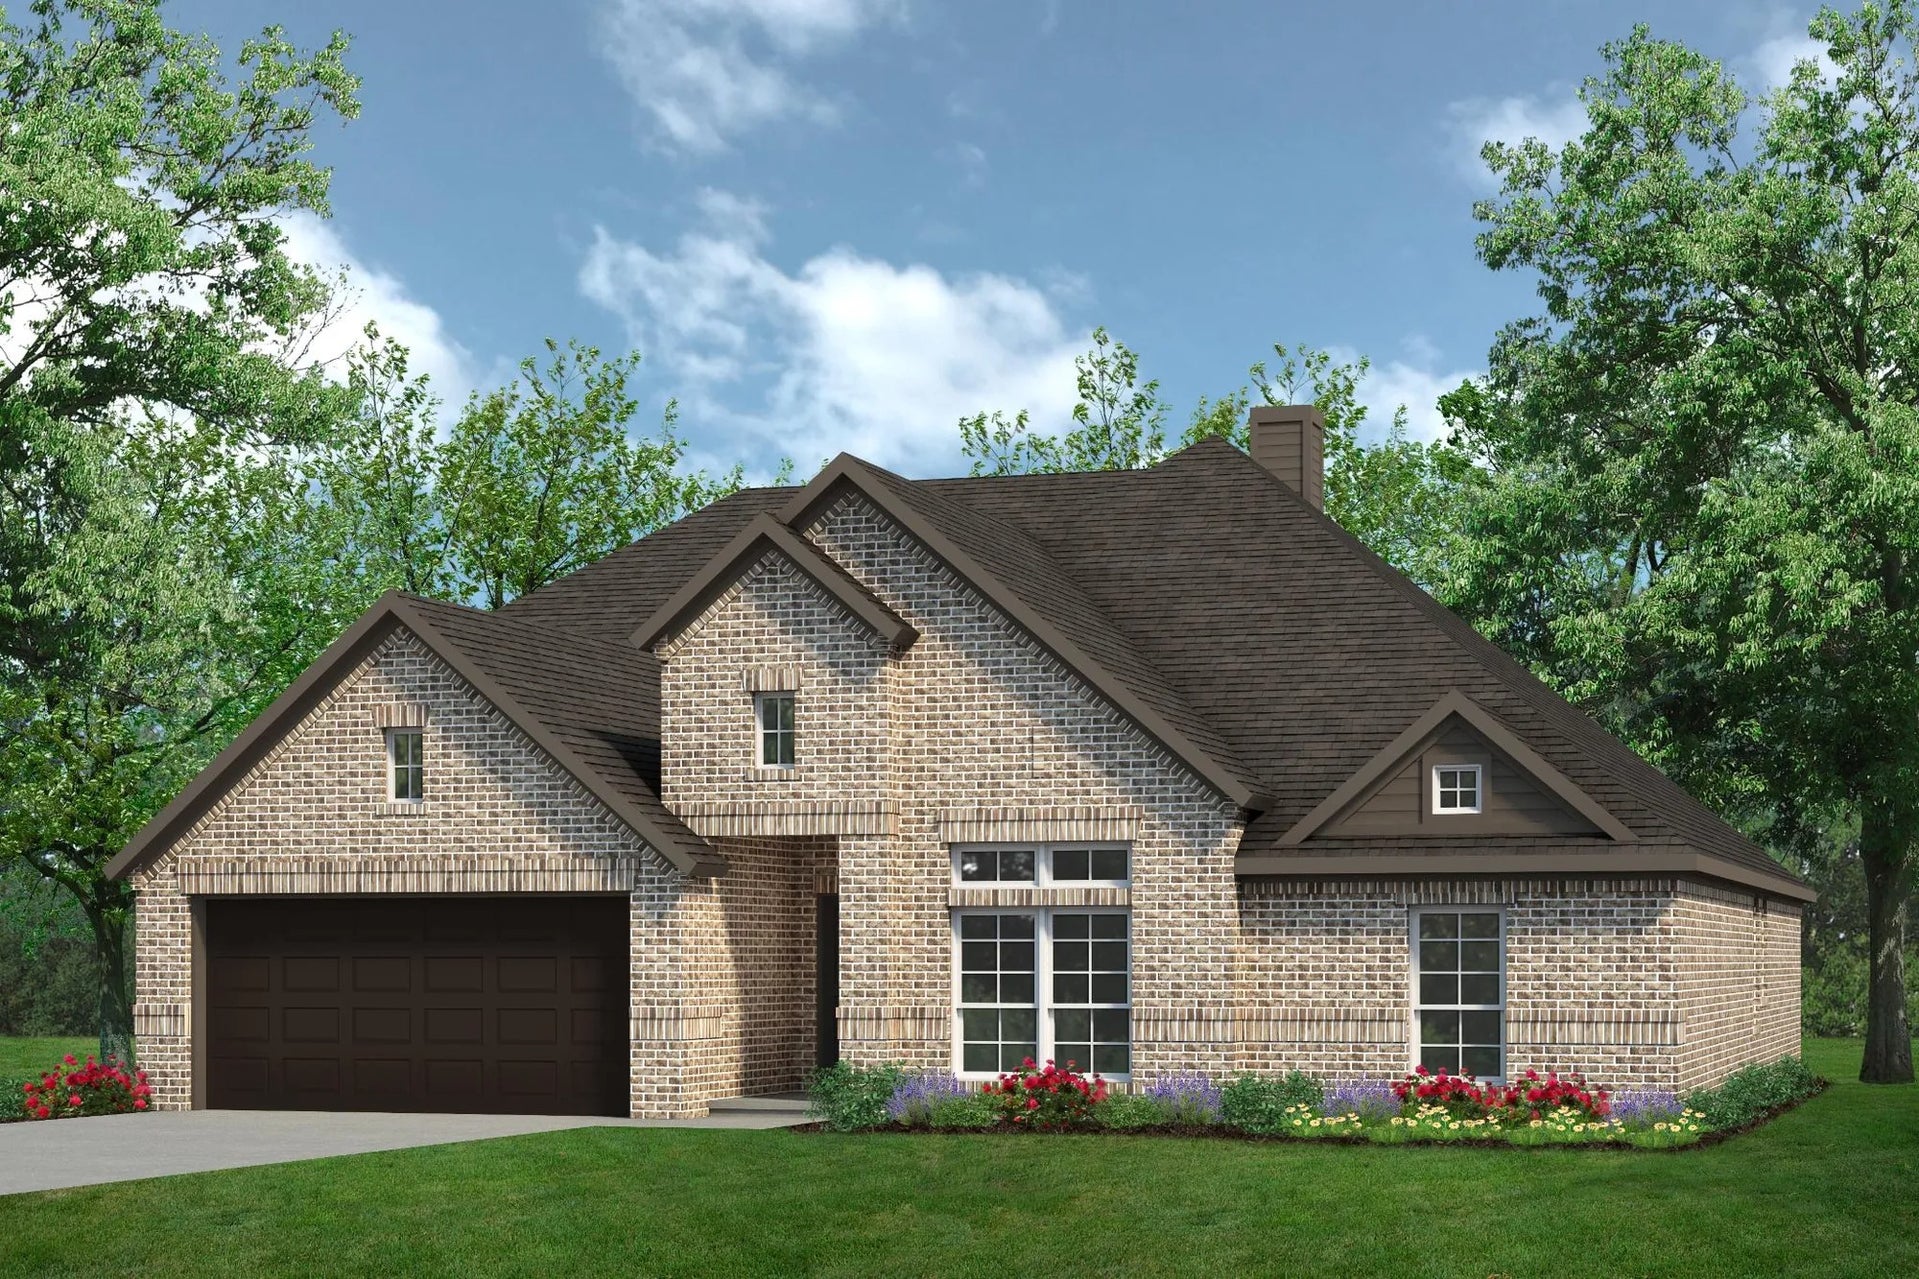 2393 C. Concept 2393 Home with 3 Bedrooms